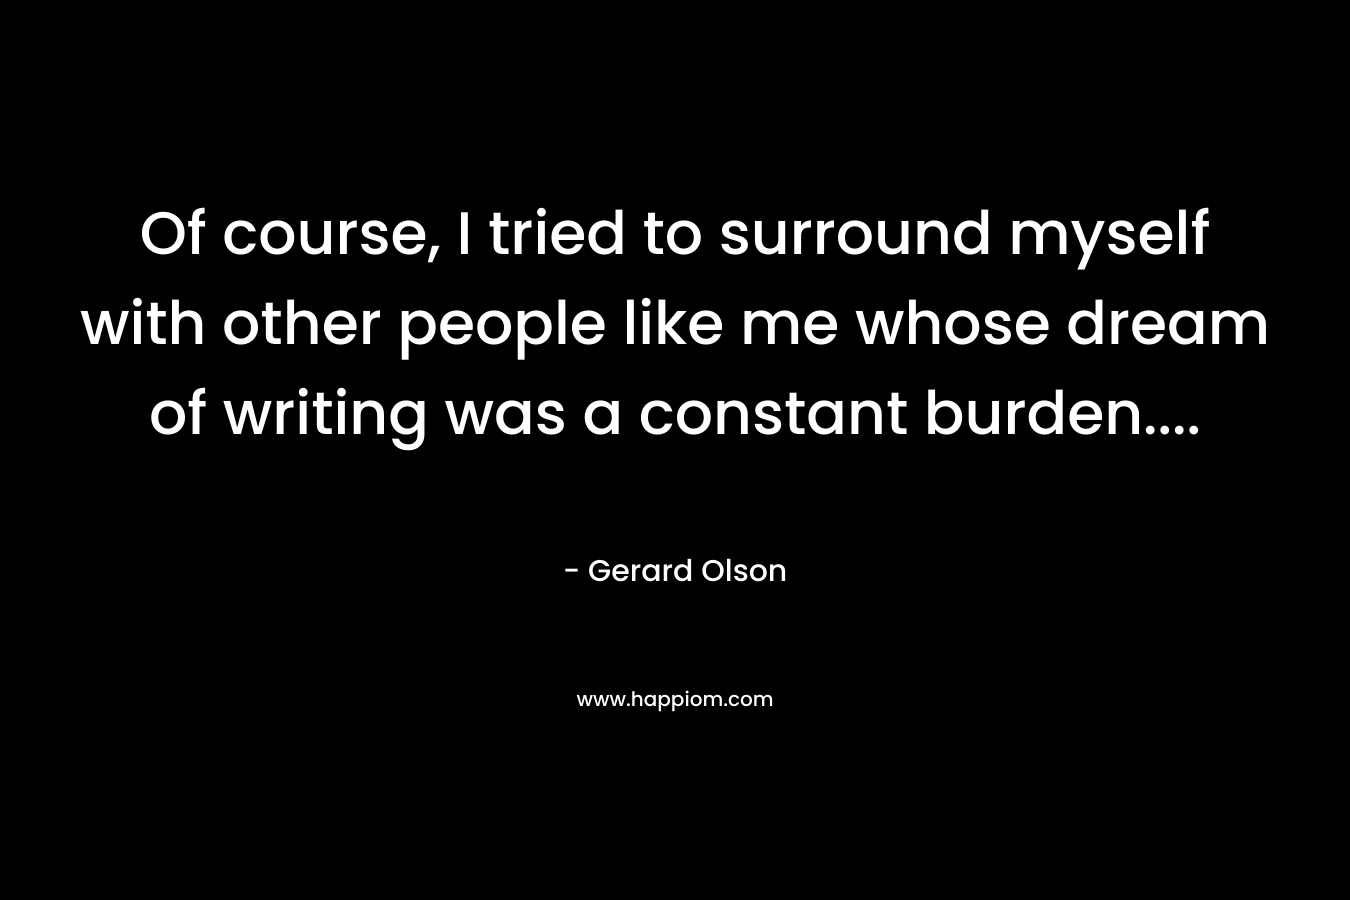 Of course, I tried to surround myself with other people like me whose dream of writing was a constant burden....